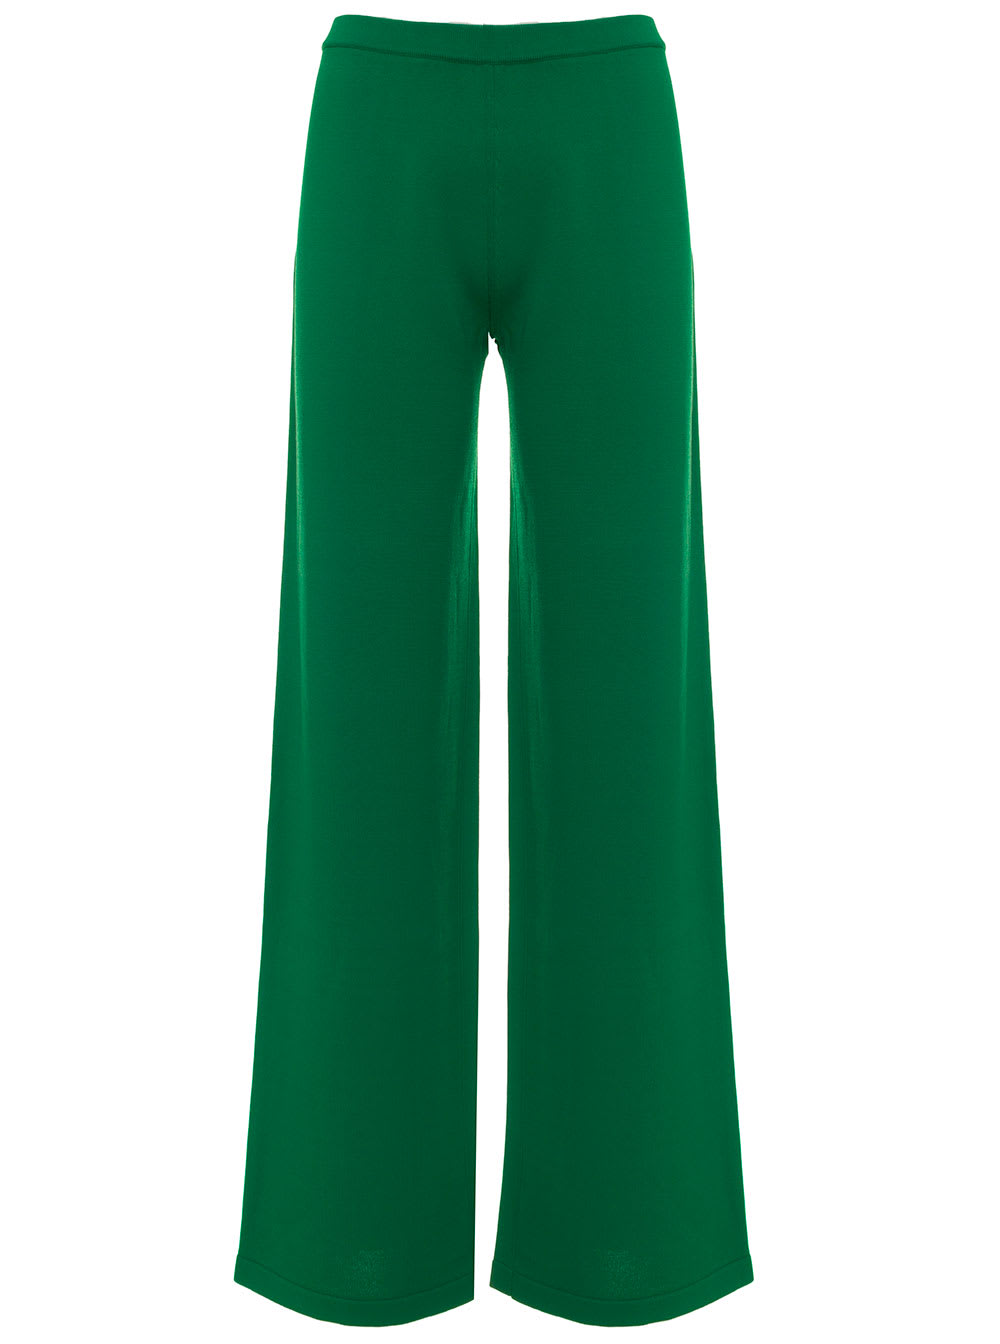 Federica Tosi Womans Green Viscose Blend Wide Leg Trousers